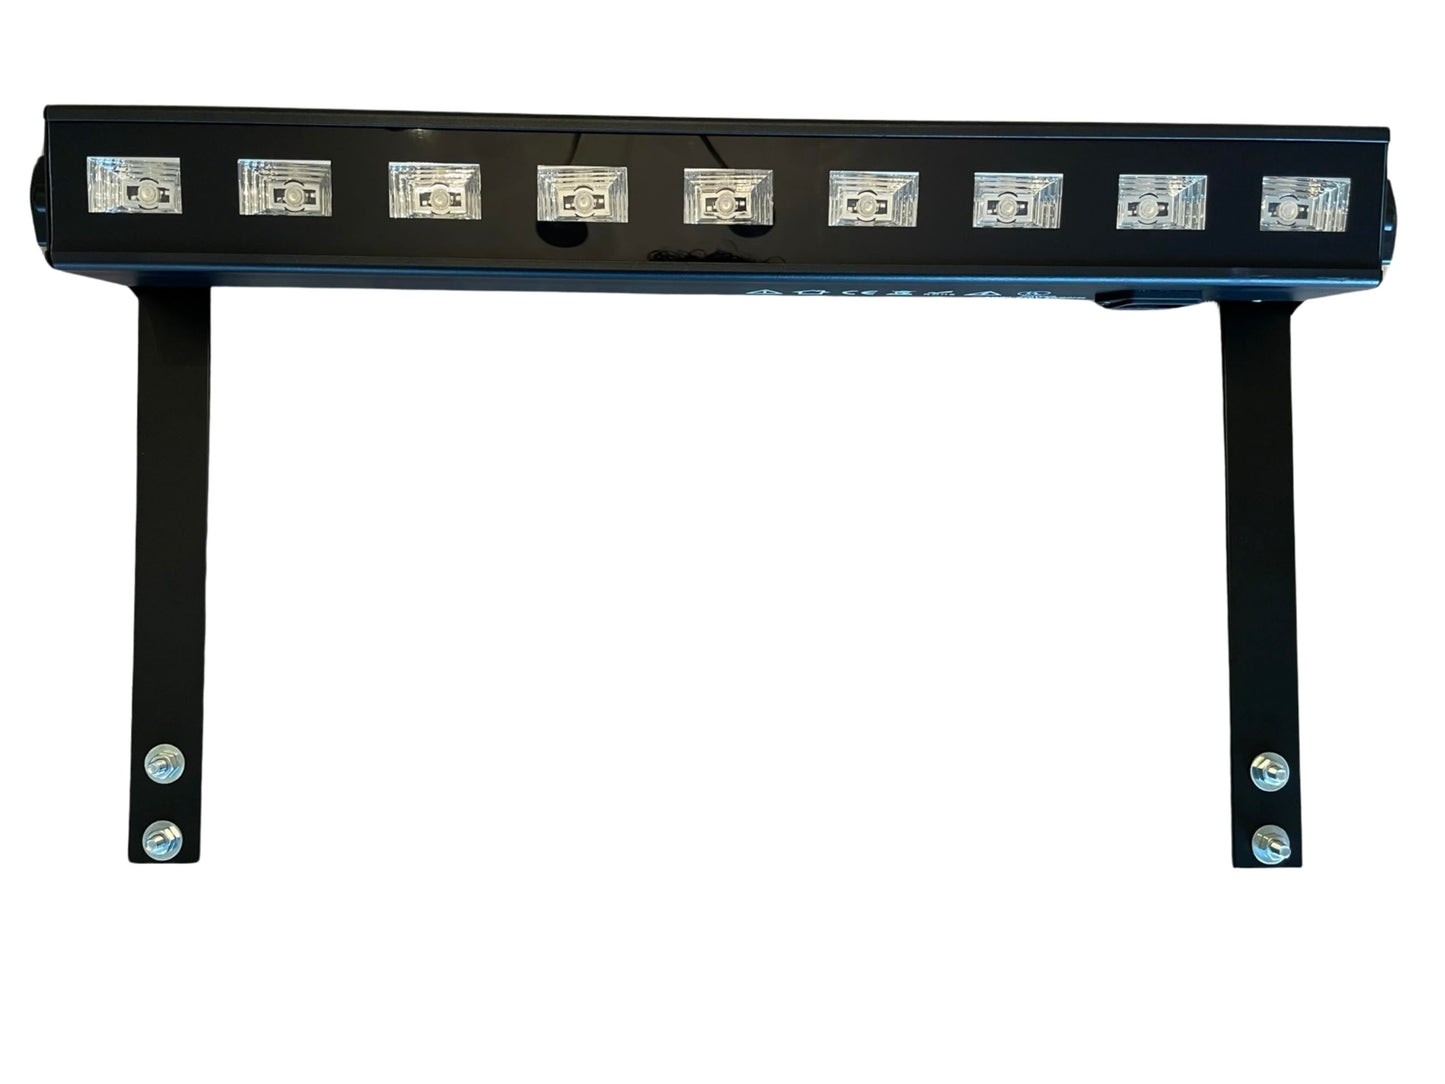 UV Black Light Bar - Choose from Small or Large (Large)